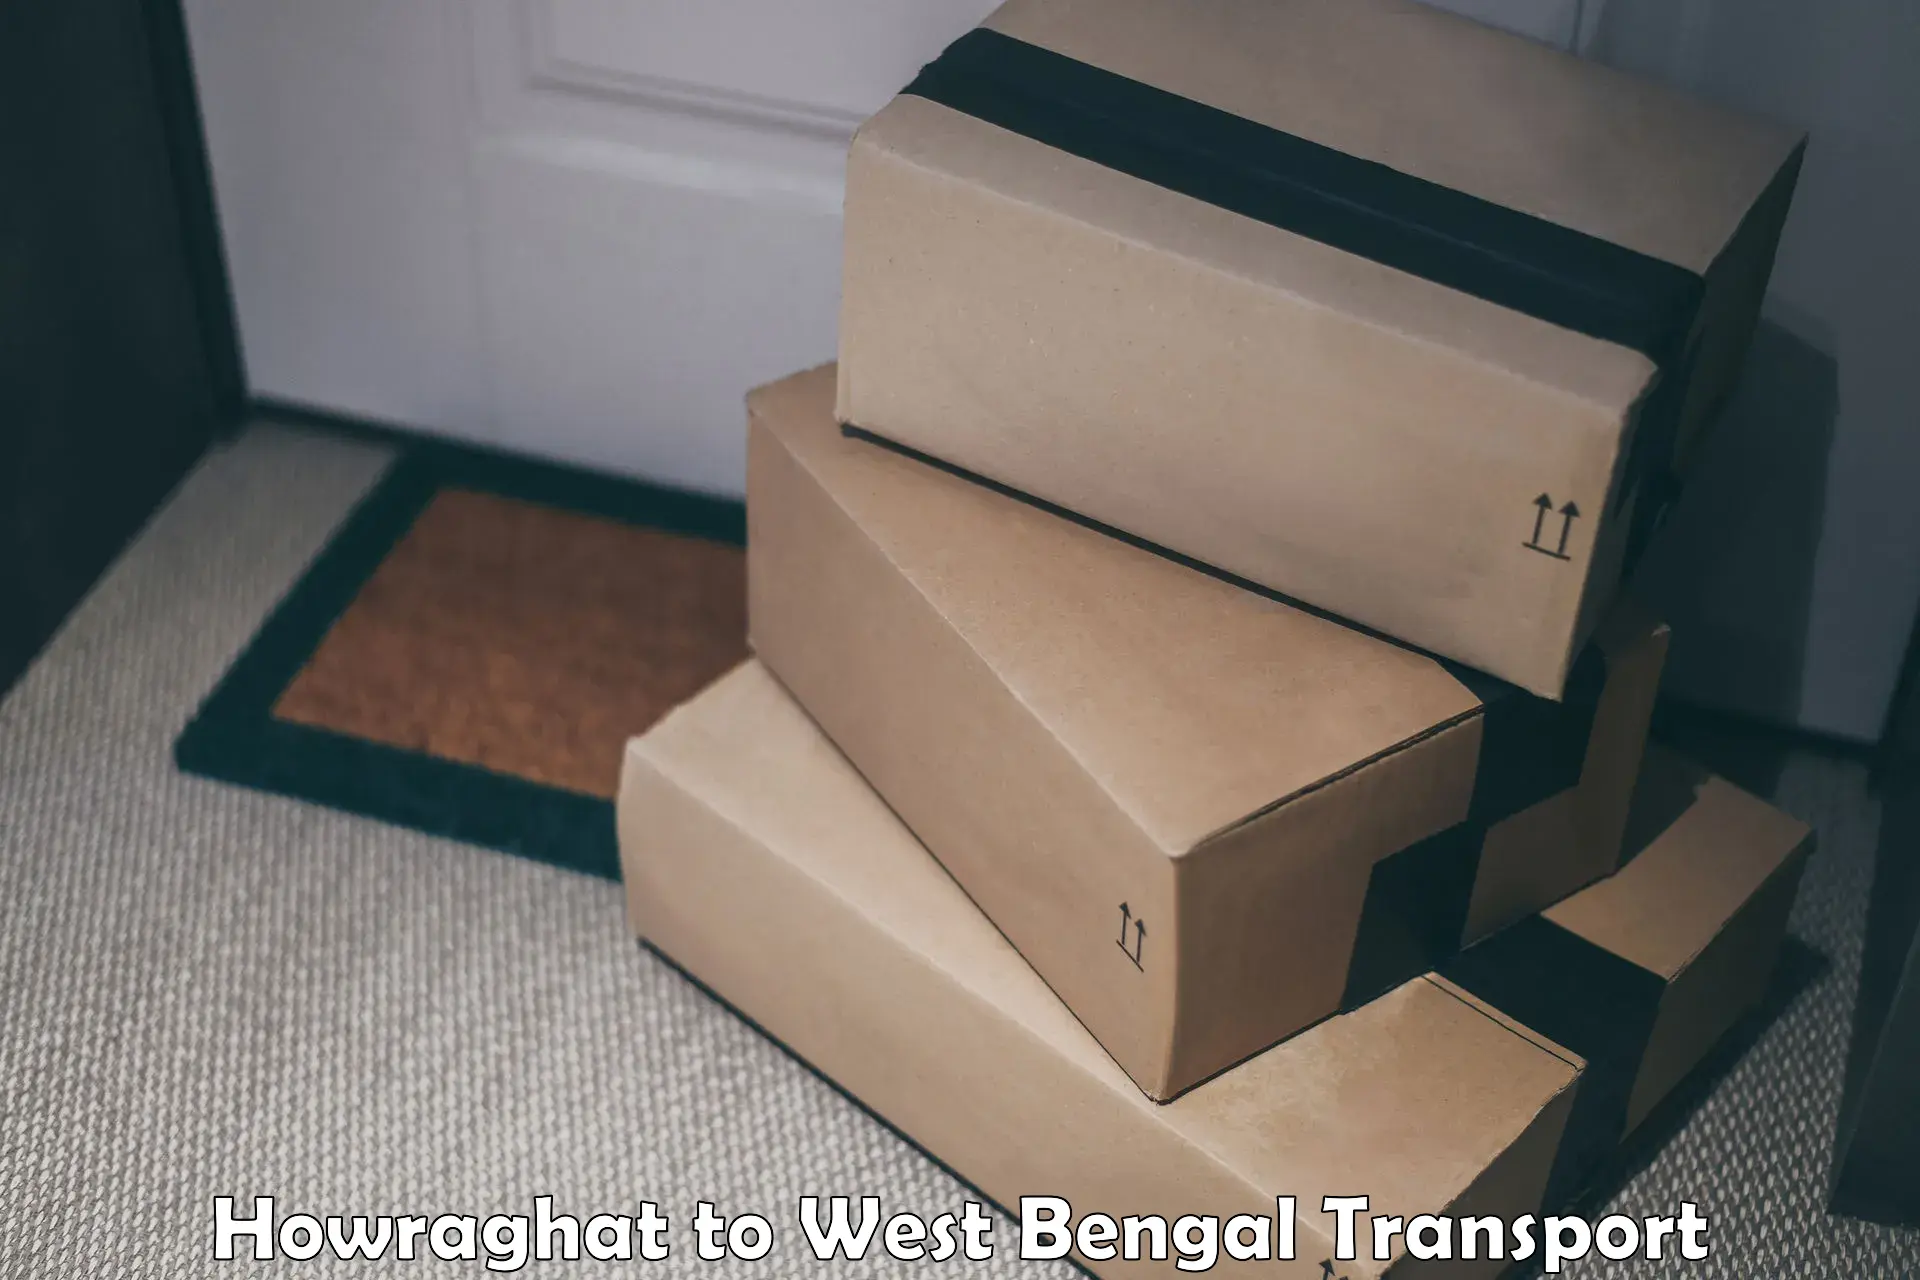 Bike shipping service Howraghat to West Bengal